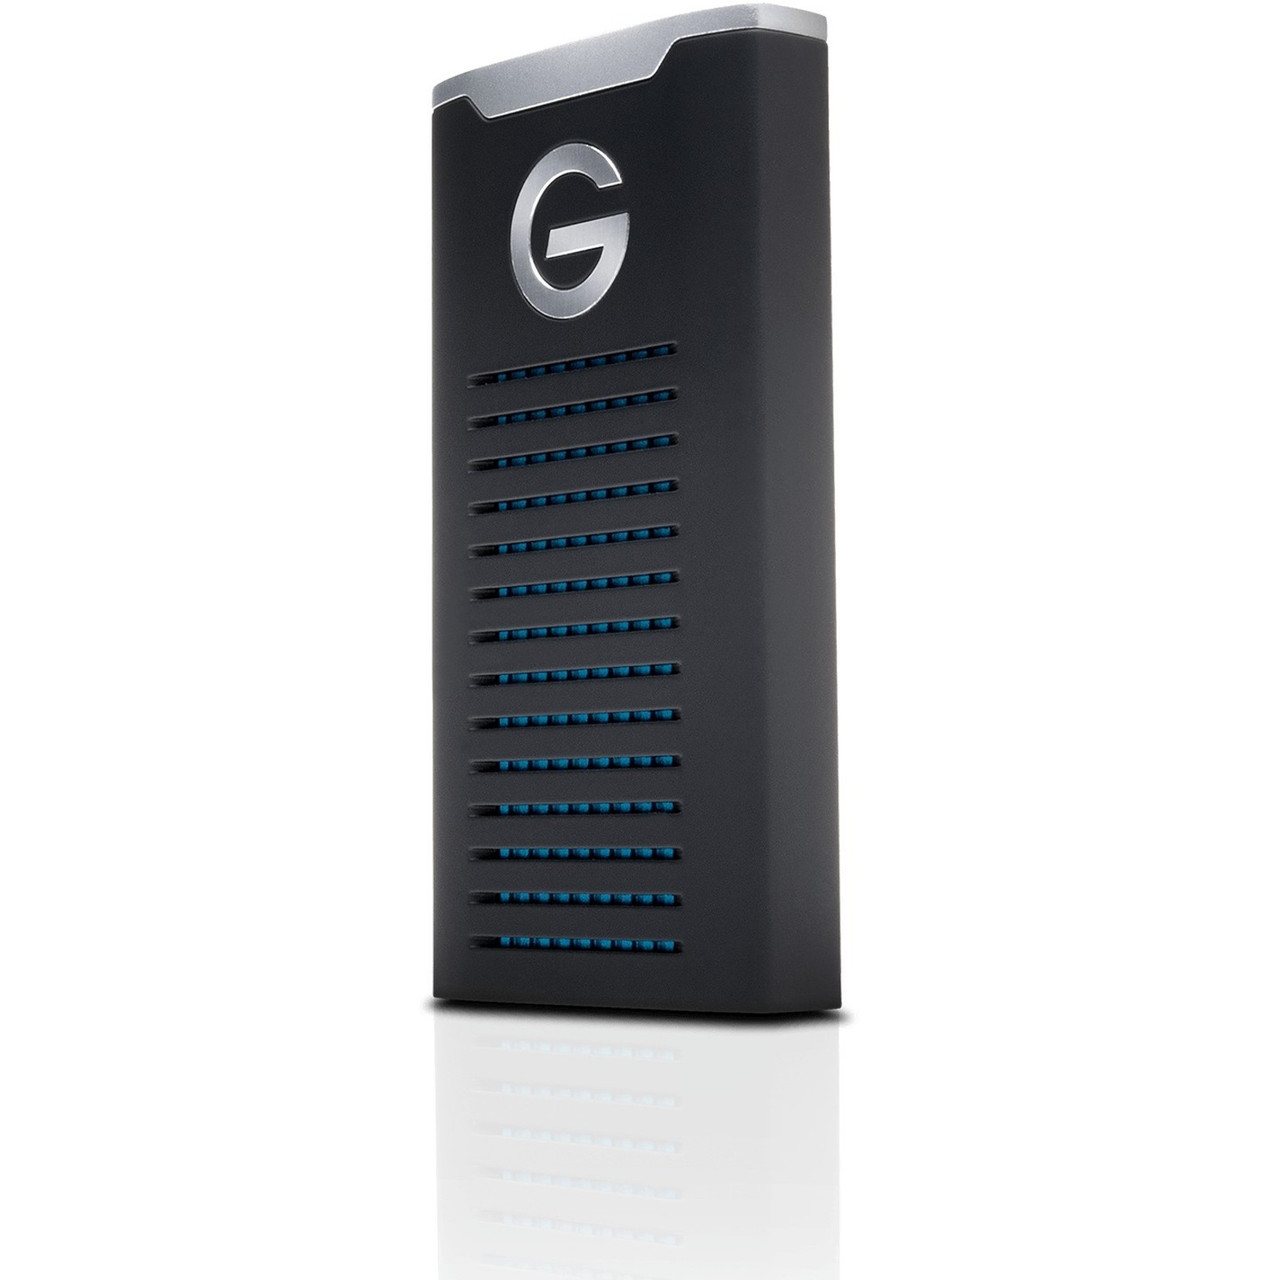 G-Technology G-DRIVE mobile 500 GB Portable Solid State Drive - External